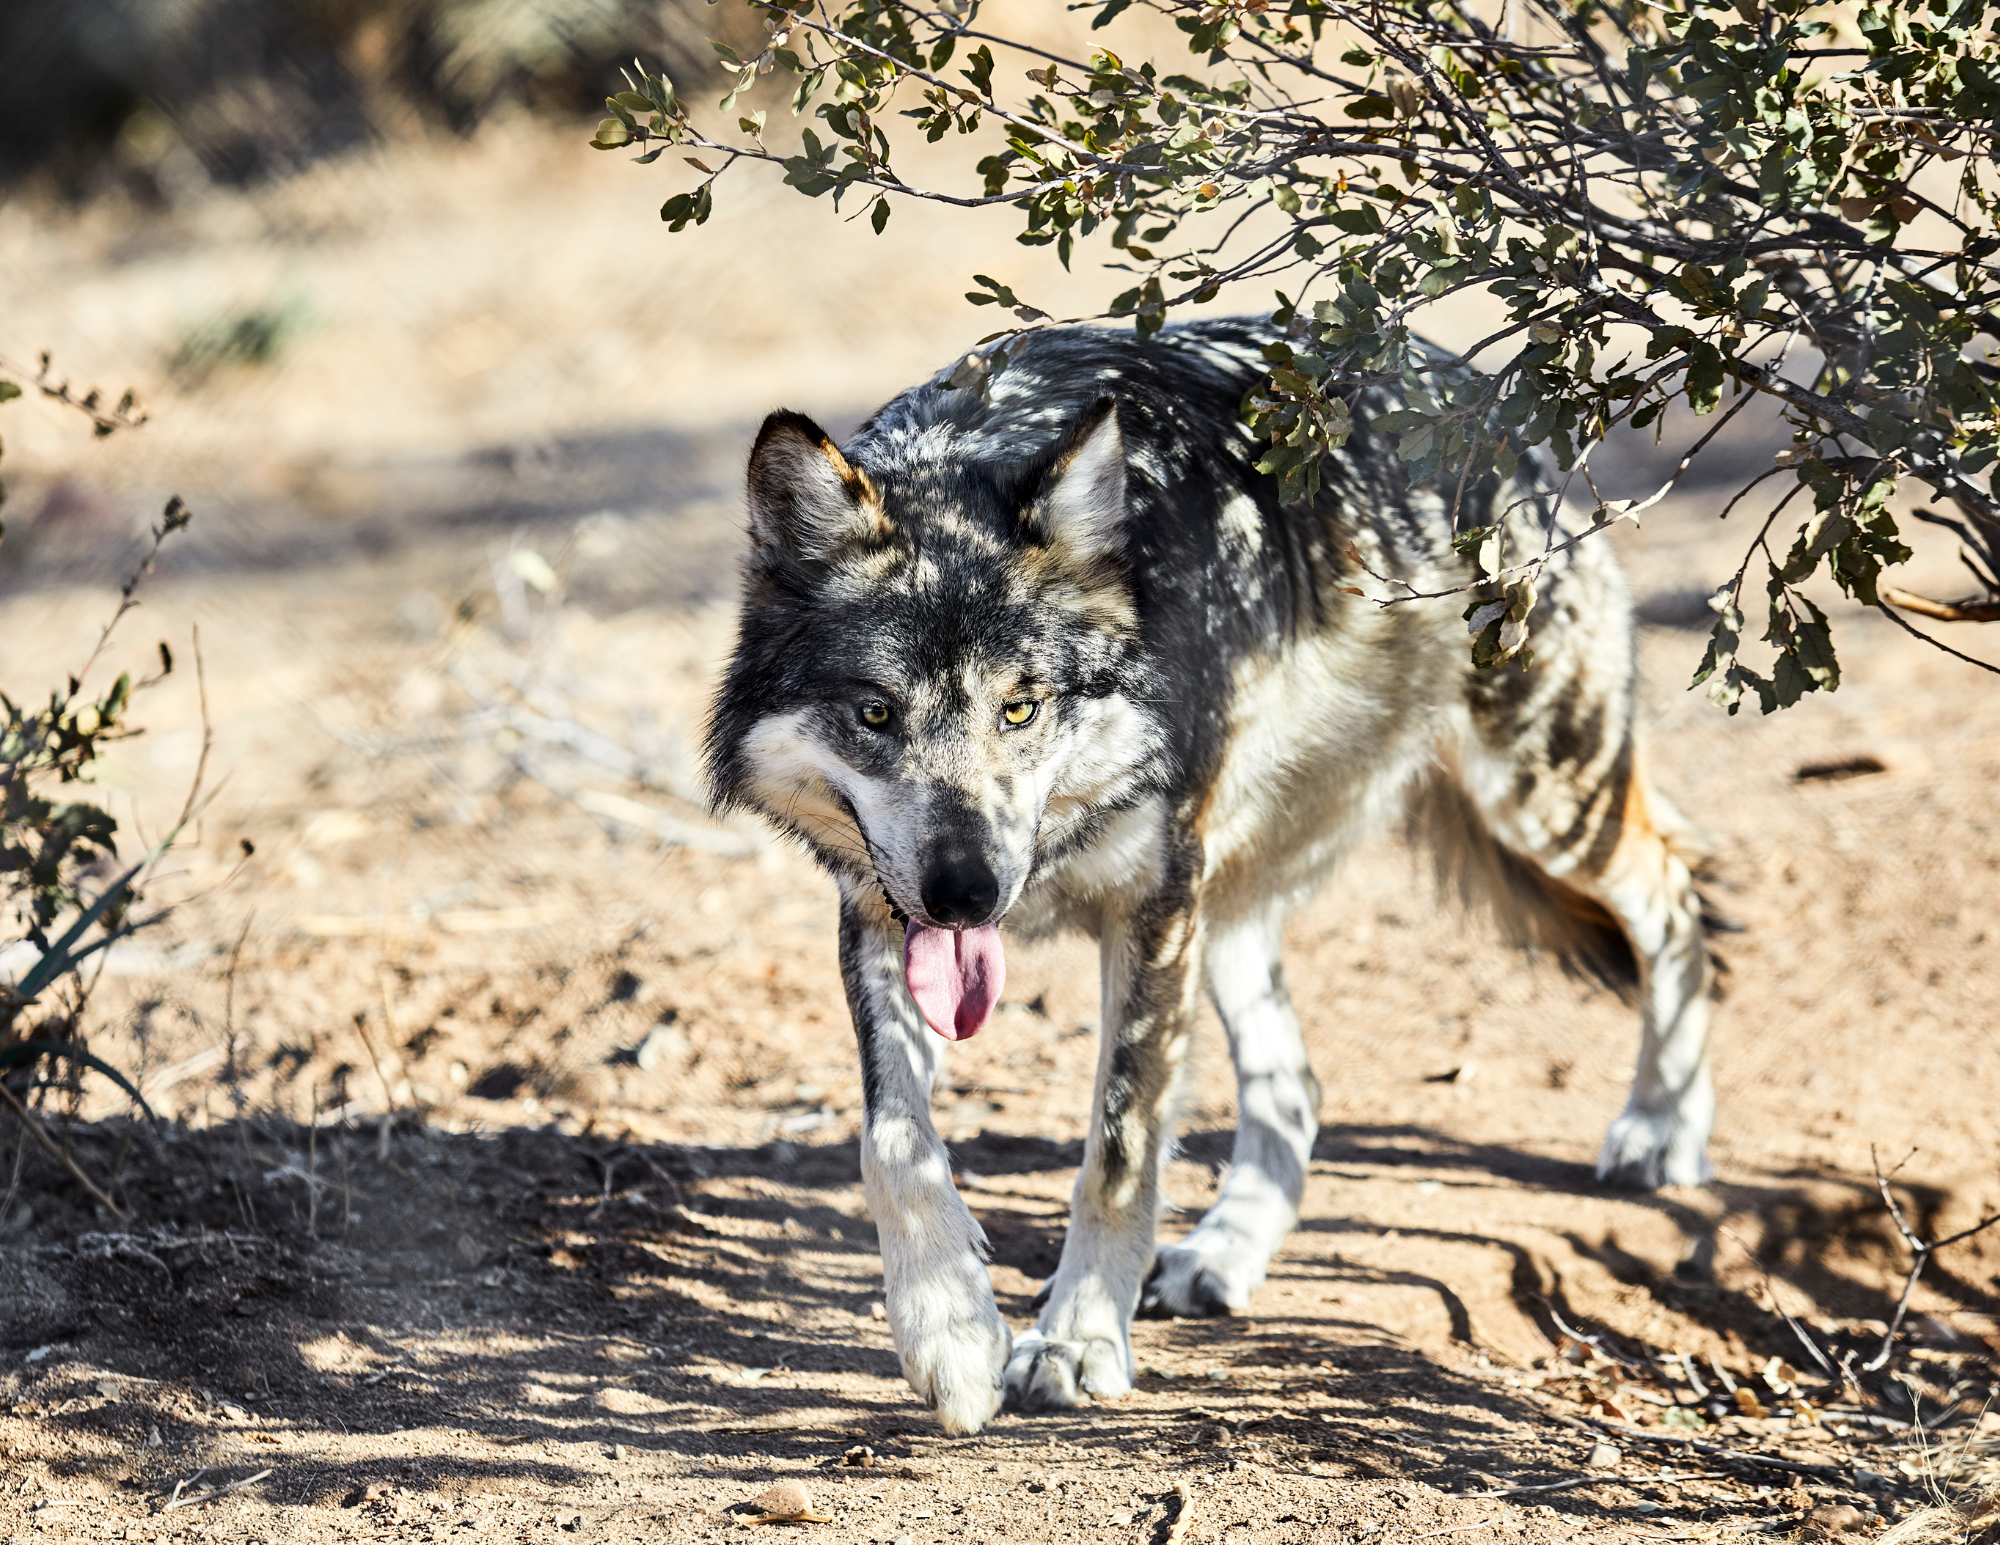 Wandering Mexican gray wolf released back into Arizona wild